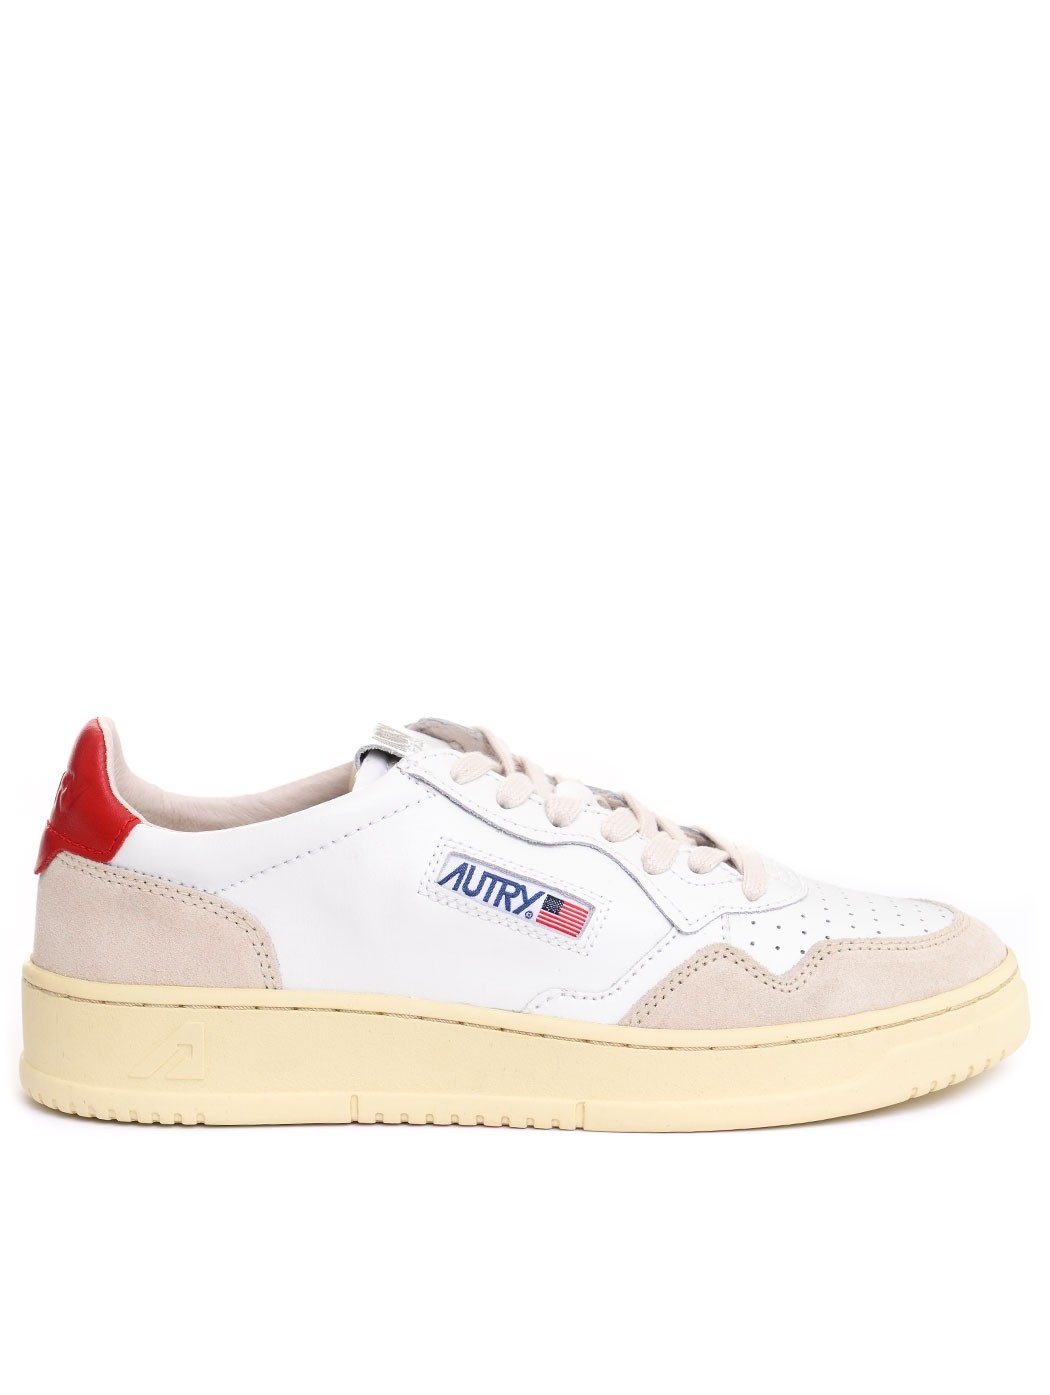  MAN SHOES,SPRING SUMMER SHOES,CHURCH'S SHOES,DIADORA HERITAGE SHOES,DIADORA HERITAGE SNEAKERS,GOLDEN GOOSE SHOES,GOLDEN GOOSE SNEAKERS  AUTRY AULM